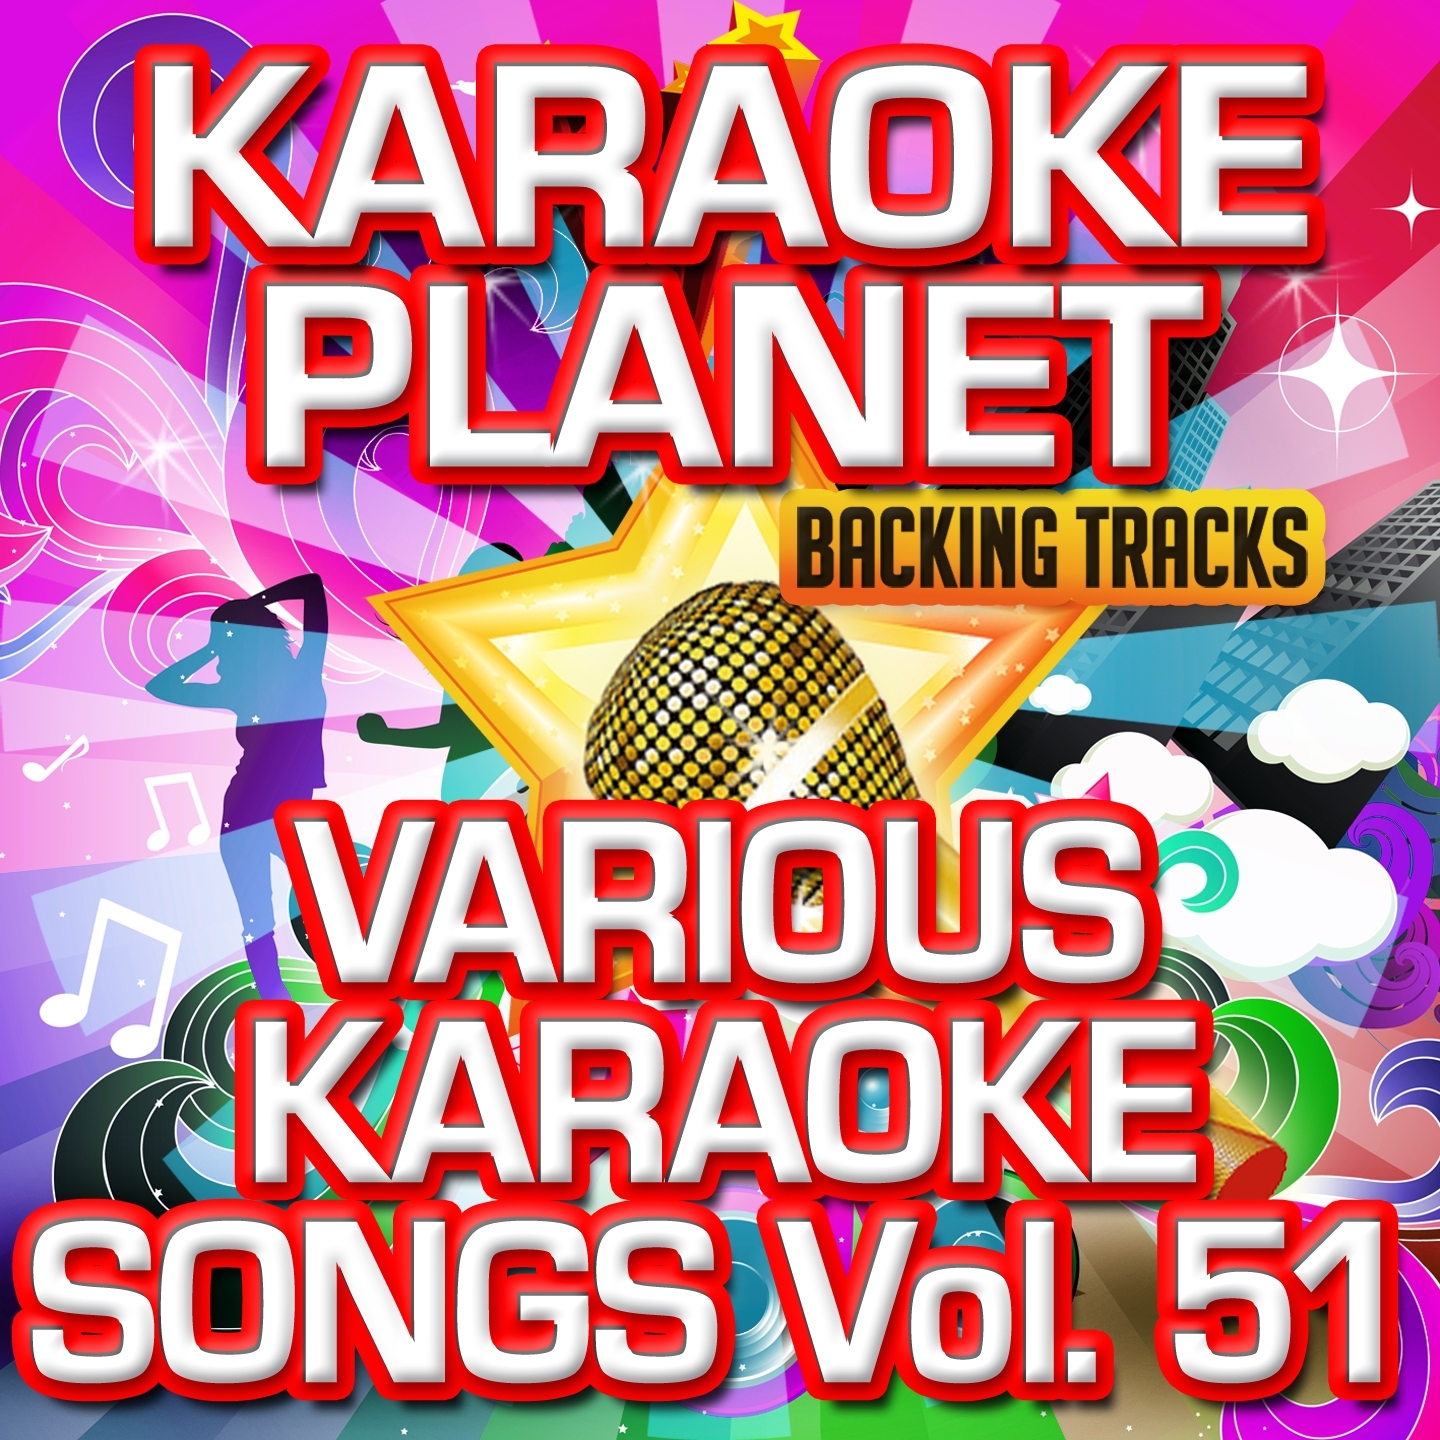 Medley: God Bless America / We Will Rock You / We Are the Champions (Karaoke Version With Background Vocals)